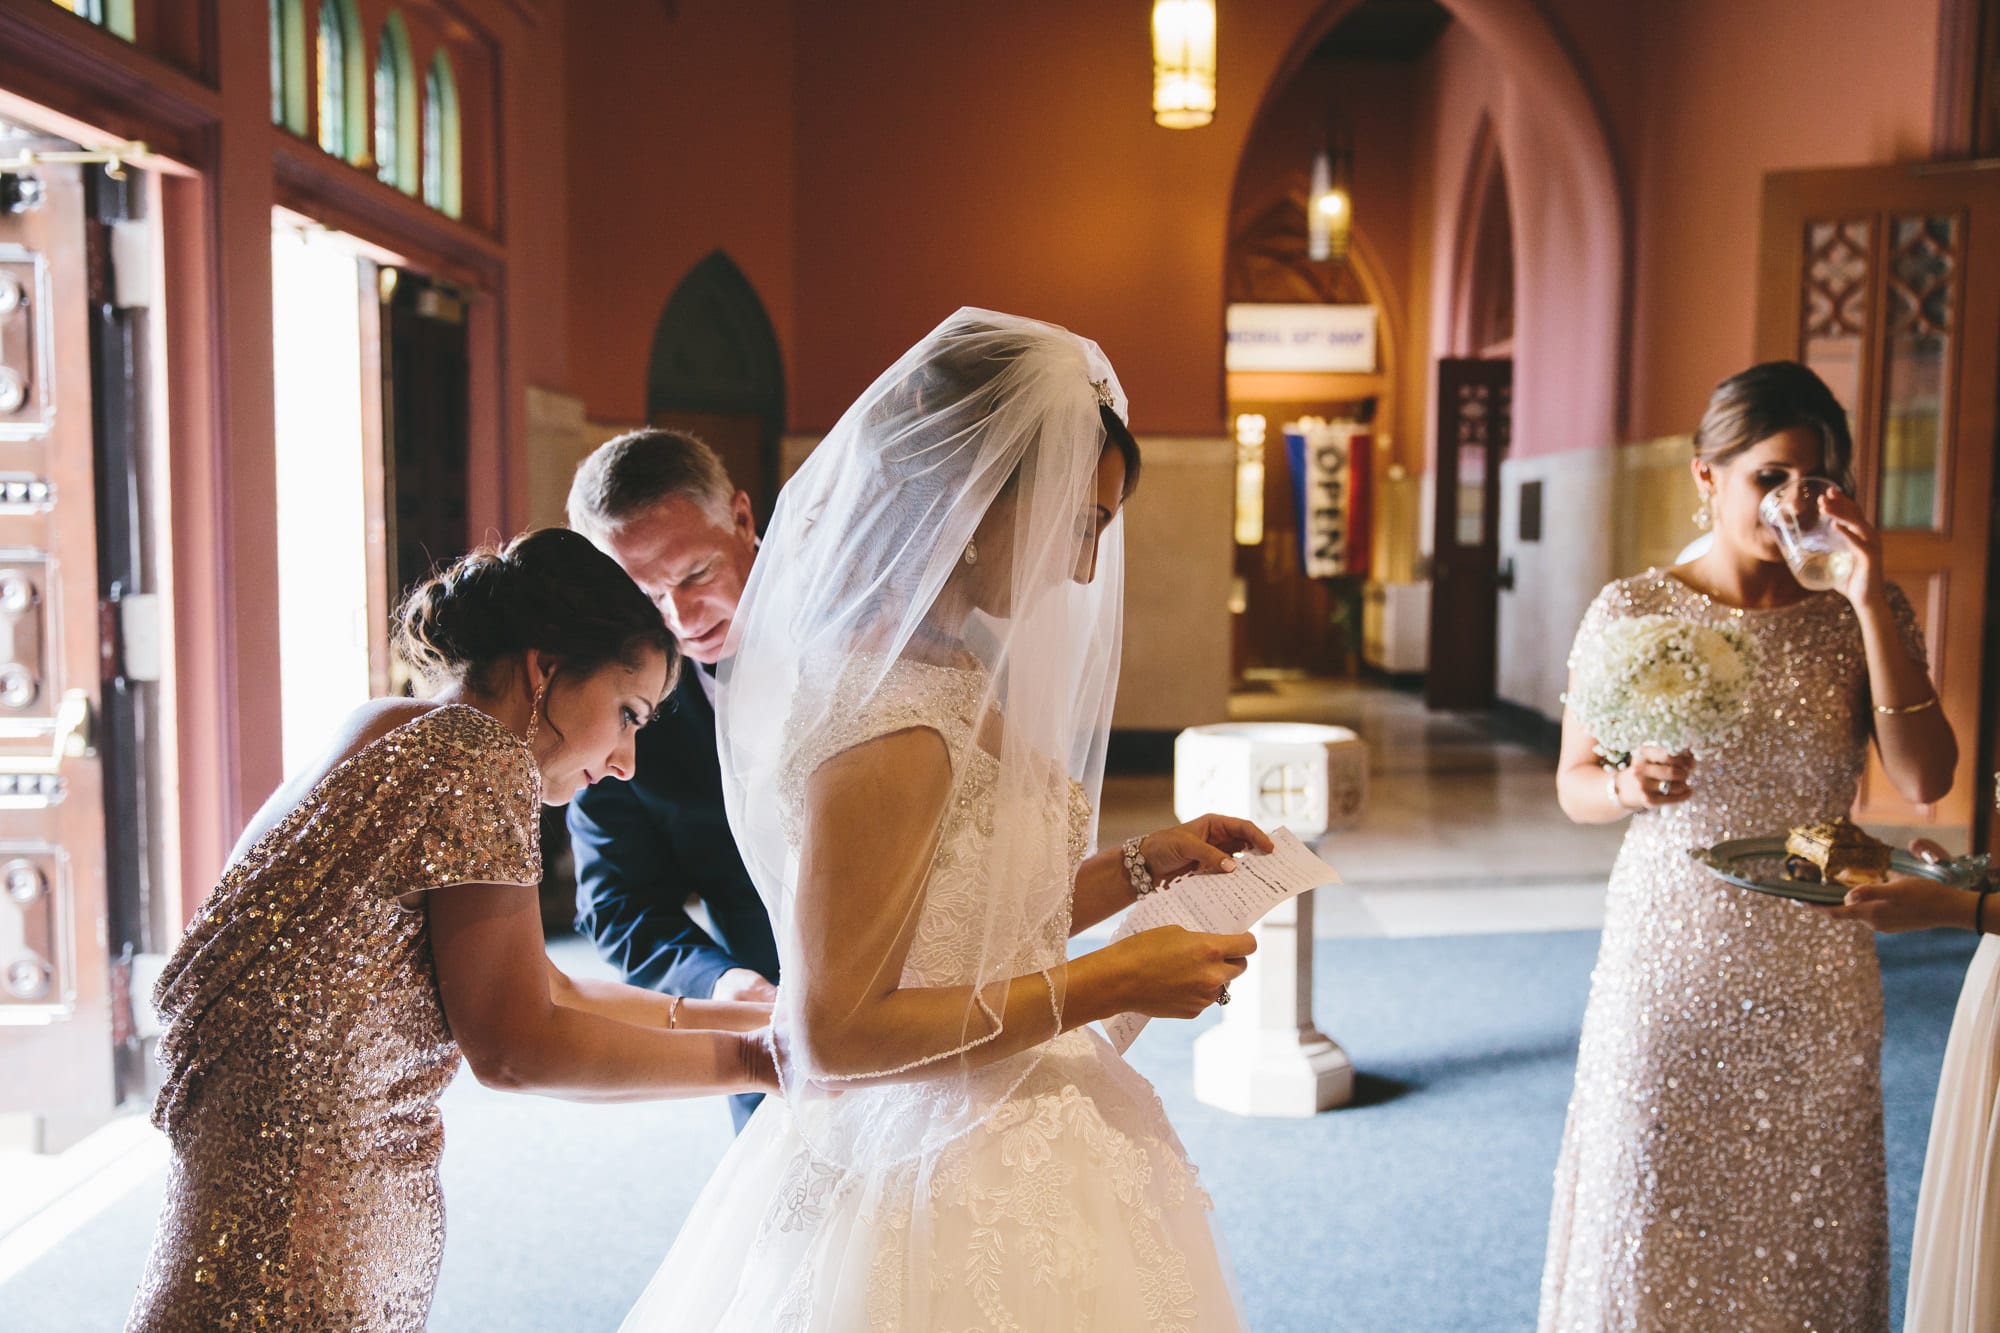 A documentary photograph of the brides father and sister fixing her dress while she reads a letter from her groom moments before walking down the aisle of the Cathedral of the Holy Cross during her State Room Wedding in Boston, Massachusetts